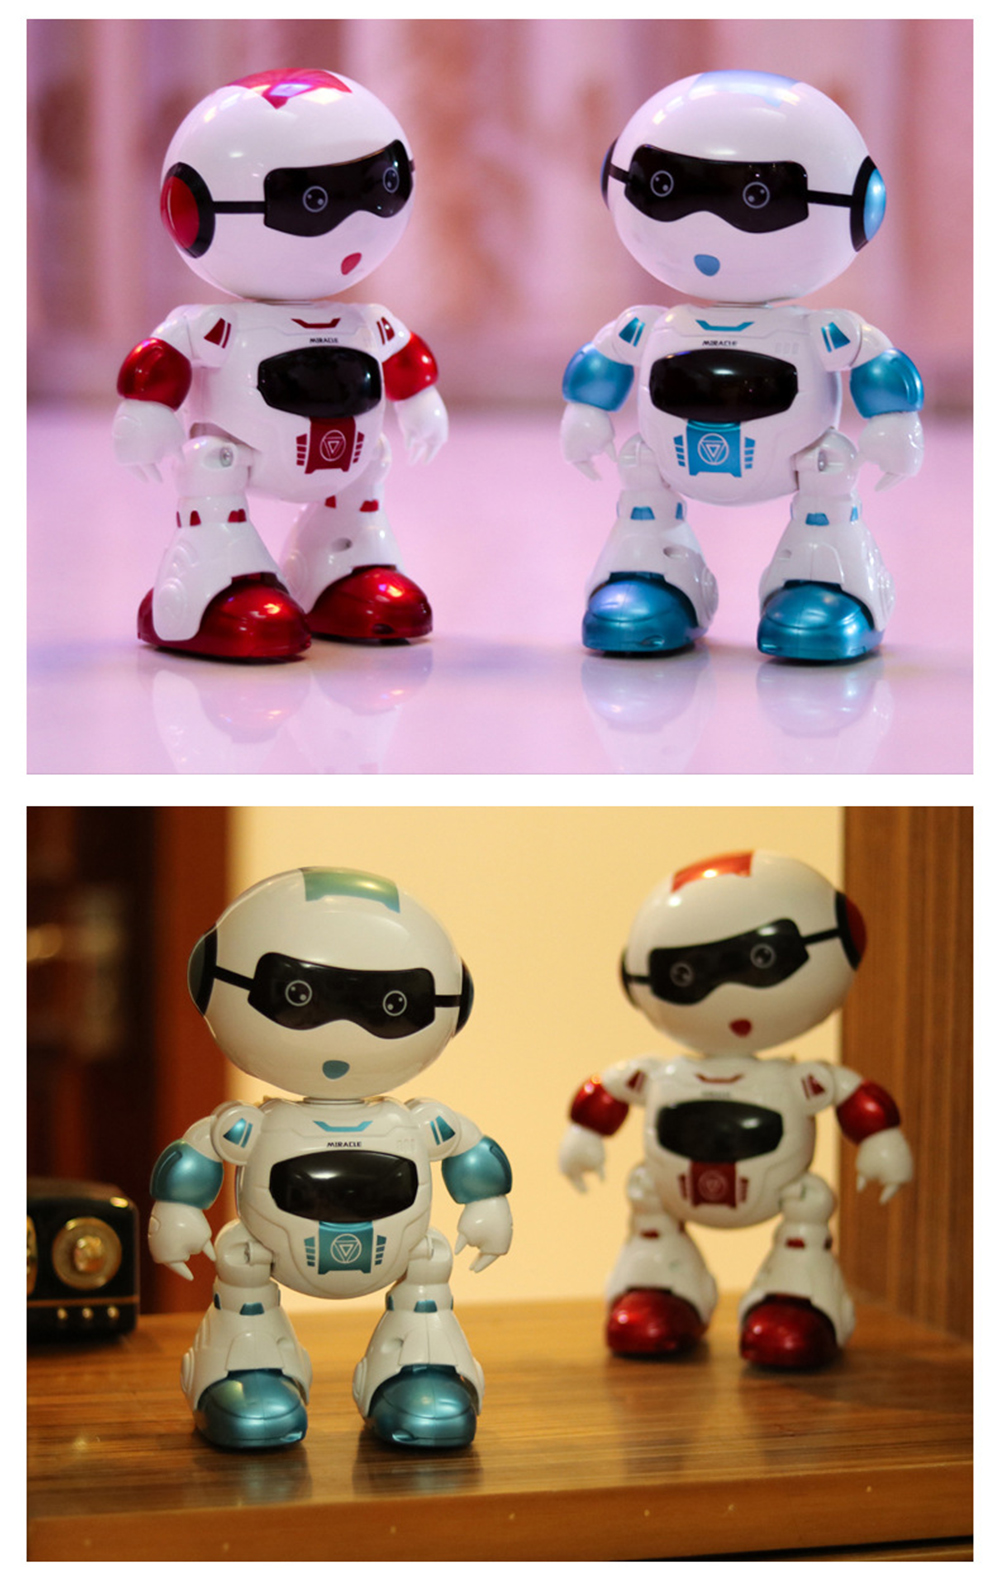 LeZhou-Smart-Touch-Control-Programmable-Voice-Interaction-Sing-Dance-RC-Robot-Toy-Gift-For-Children-1521513-8